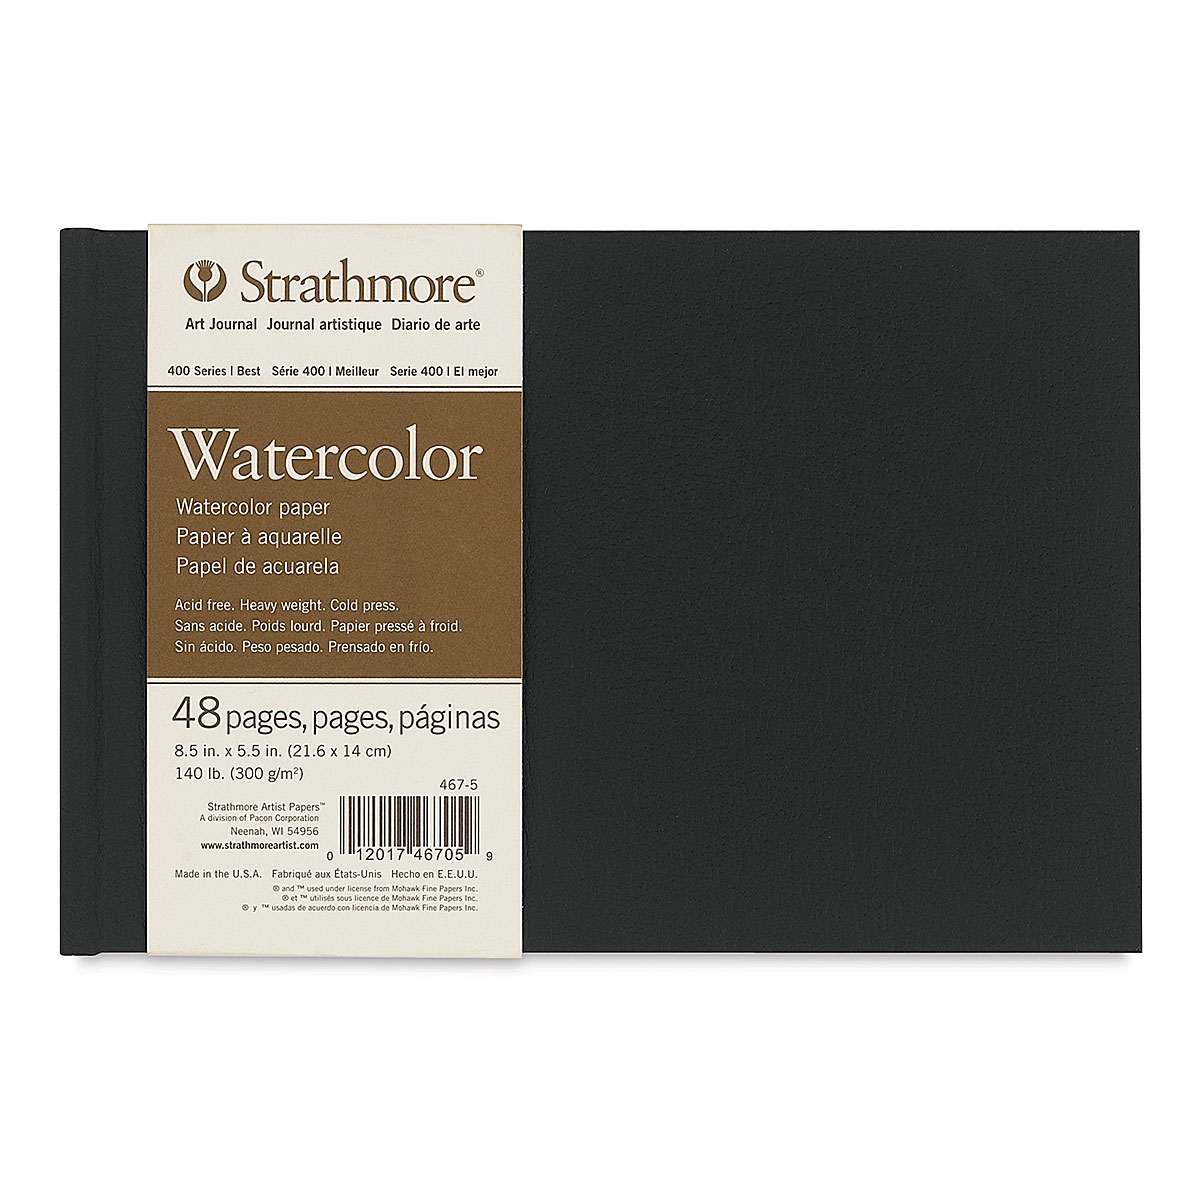 Fabriano Artistico Watercolor Paper - 55 x 11 yds, Traditional White, Hot  Press, Roll, BLICK Art Materials